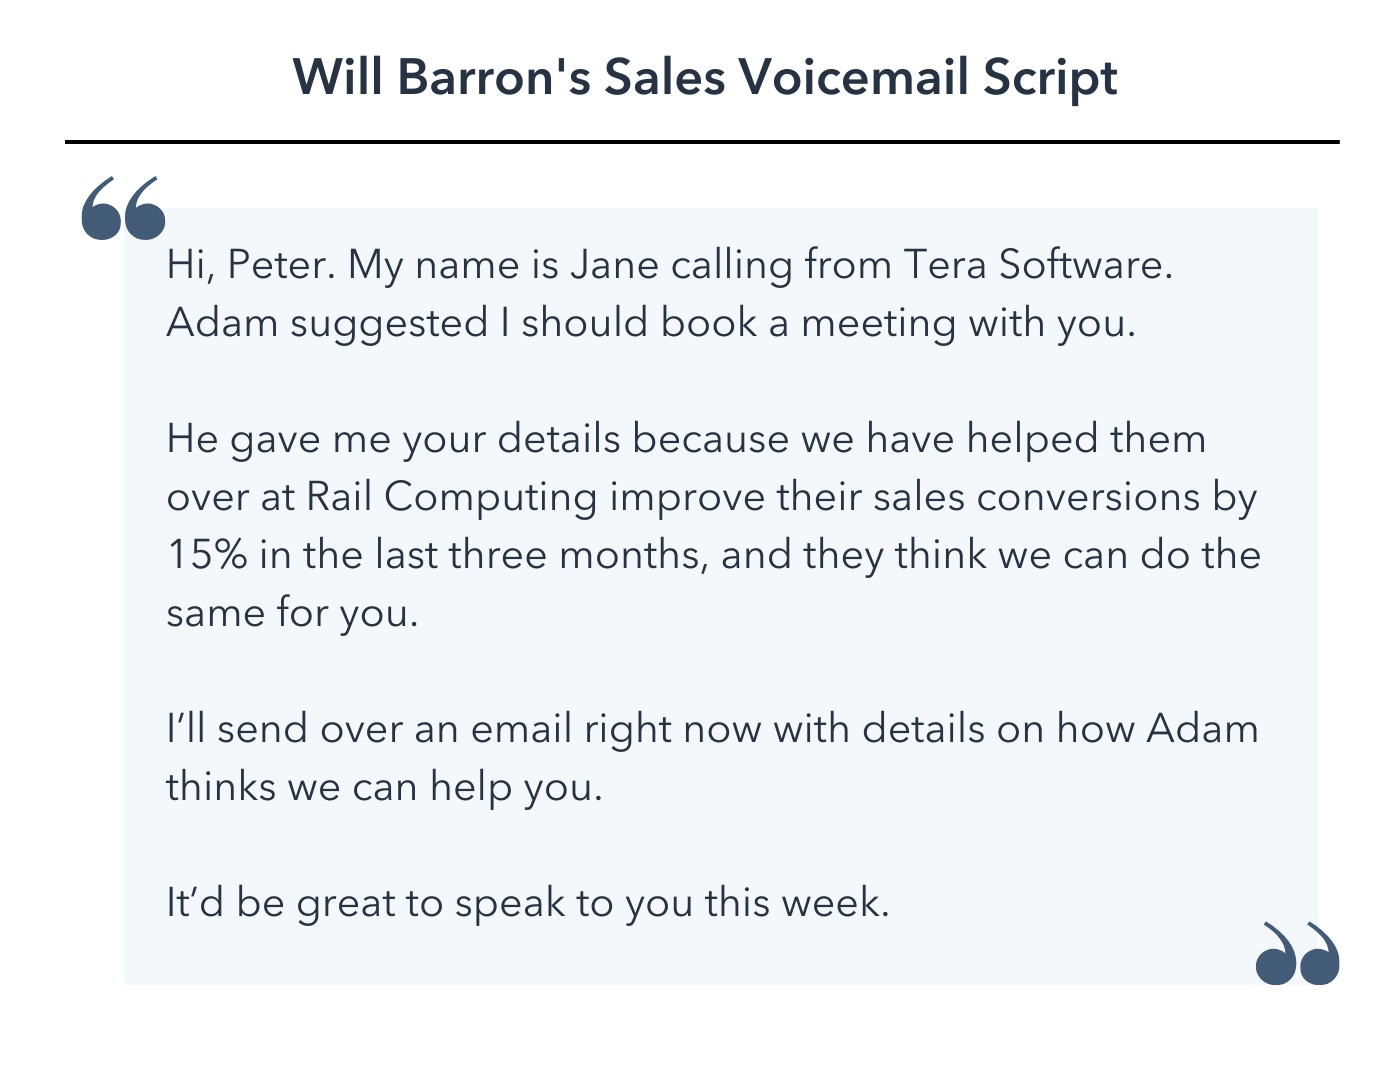 Hi, Peter. My name is Jane calling from Tera Software. Adam suggested I should book a meeting with you. He gave me your details because we have helped them over at Rail Computing improve their sales conversions by 15% in the last three months, and they think we can do the same for you. I’ll send over an email right now with details on how Adam thinks we can help you. It’d be great to speak to you this week.